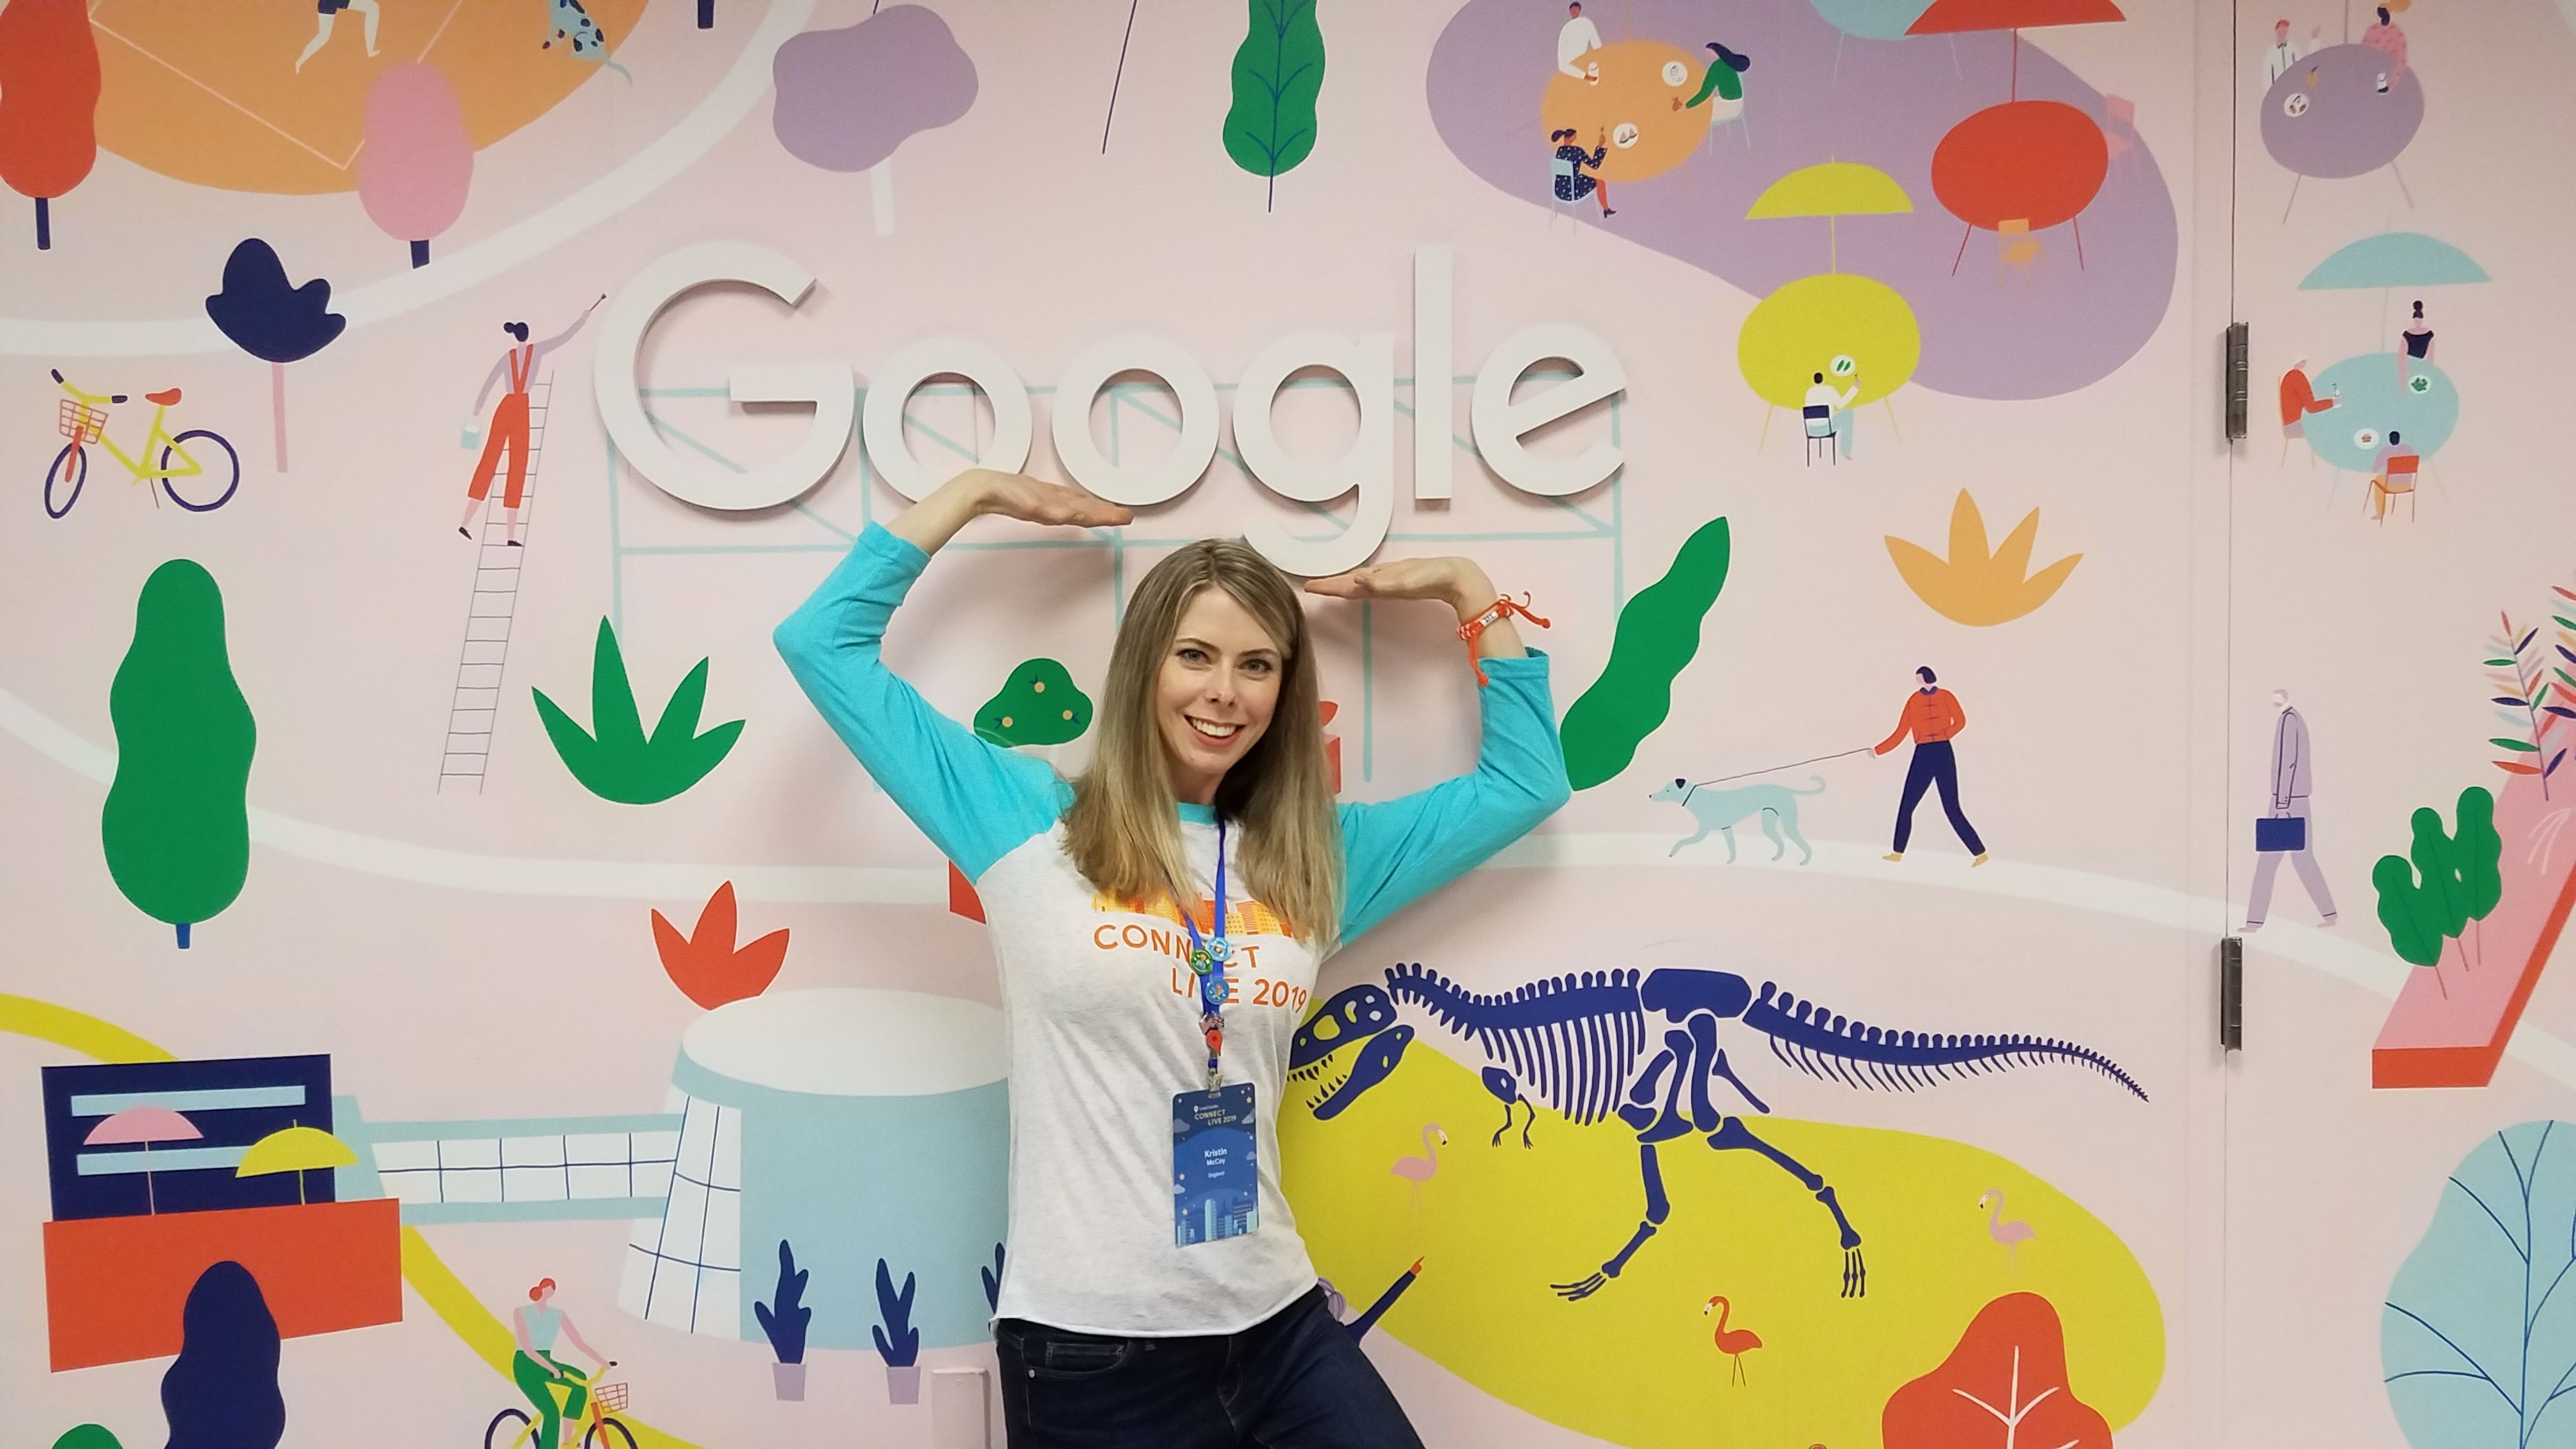 TheRealKristin holds up the Google logo sign